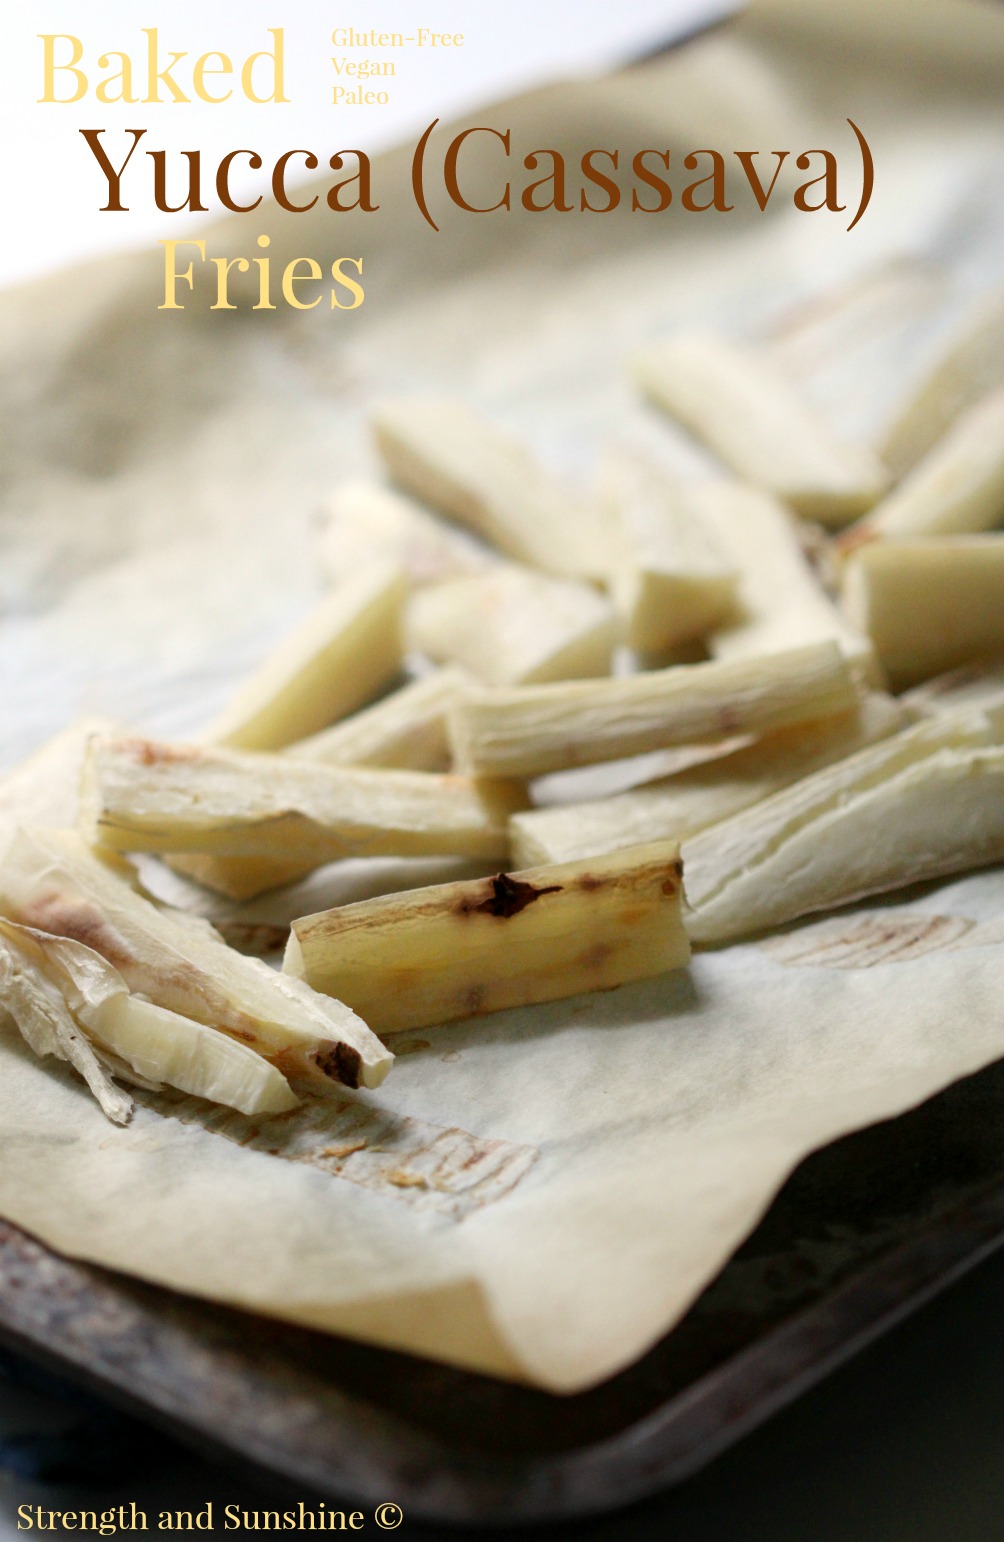 Baked Yucca (Cassava) Fries | Strength and Sunshine @RebeccaGF666 Don't let the "tough" exterior scare you. Yucca (Cassava) root is one delicious plant starch to add to your diet. When prepared properly, you can make the best baked , crispy, creamy, yucca (cassava) fries! Gluten-free, paleo, vegan, and Whole 30 approved side dish!